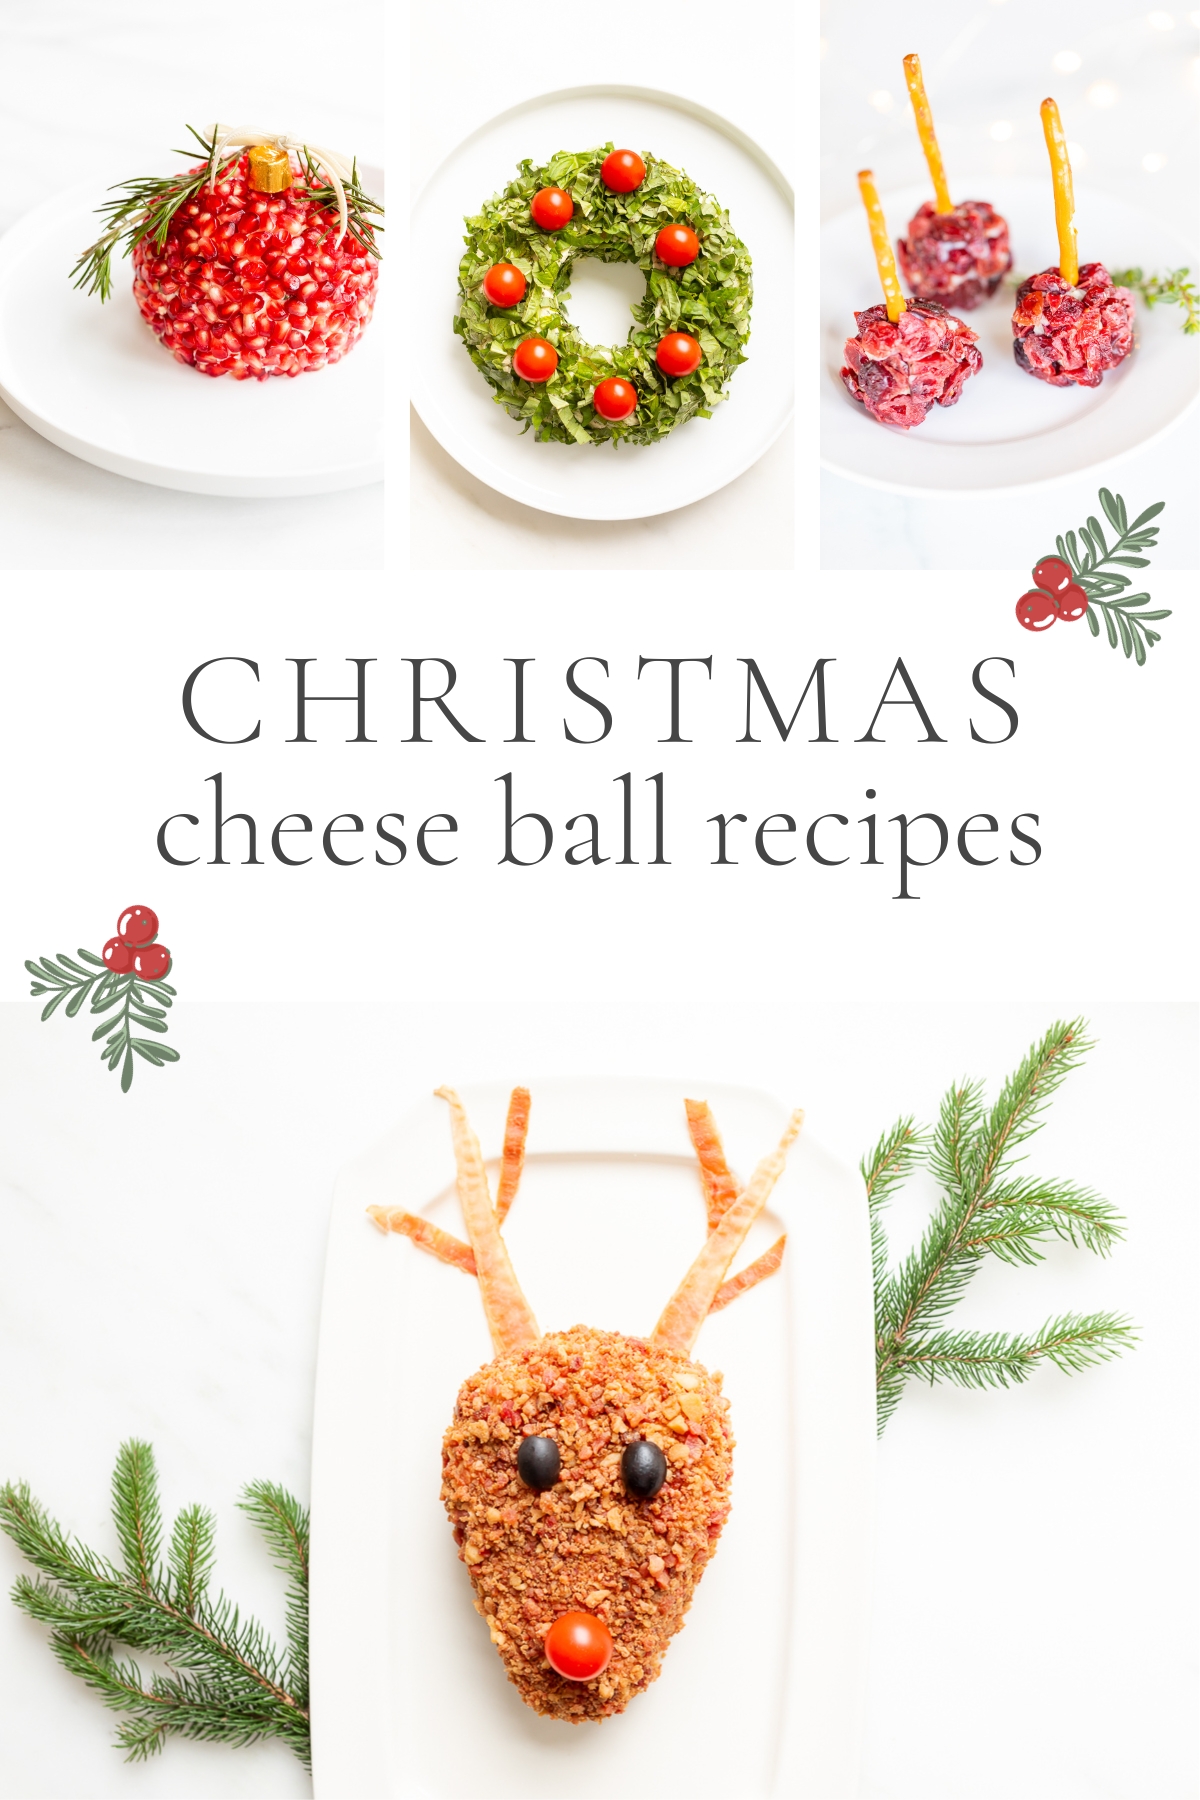 A graphic featuring a variety of holiday cheeseballs, titled "the best christmas cheese ball recipes".